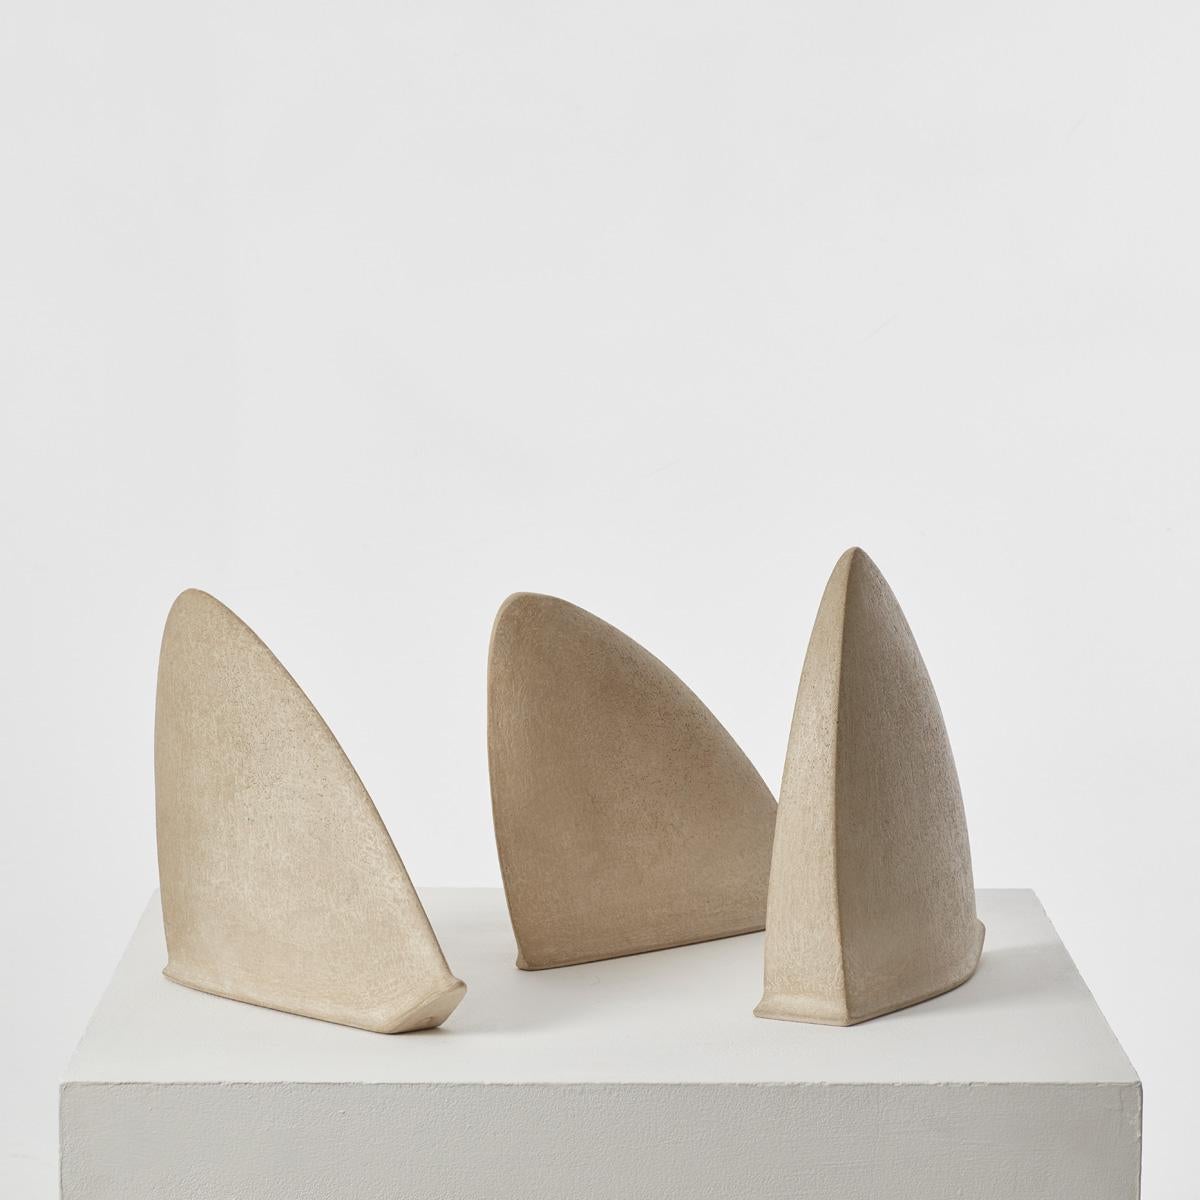 Set of Three ‘Shark Fin’ Sculptures from the Collection of Sir Terence Conran In Good Condition For Sale In London, GB